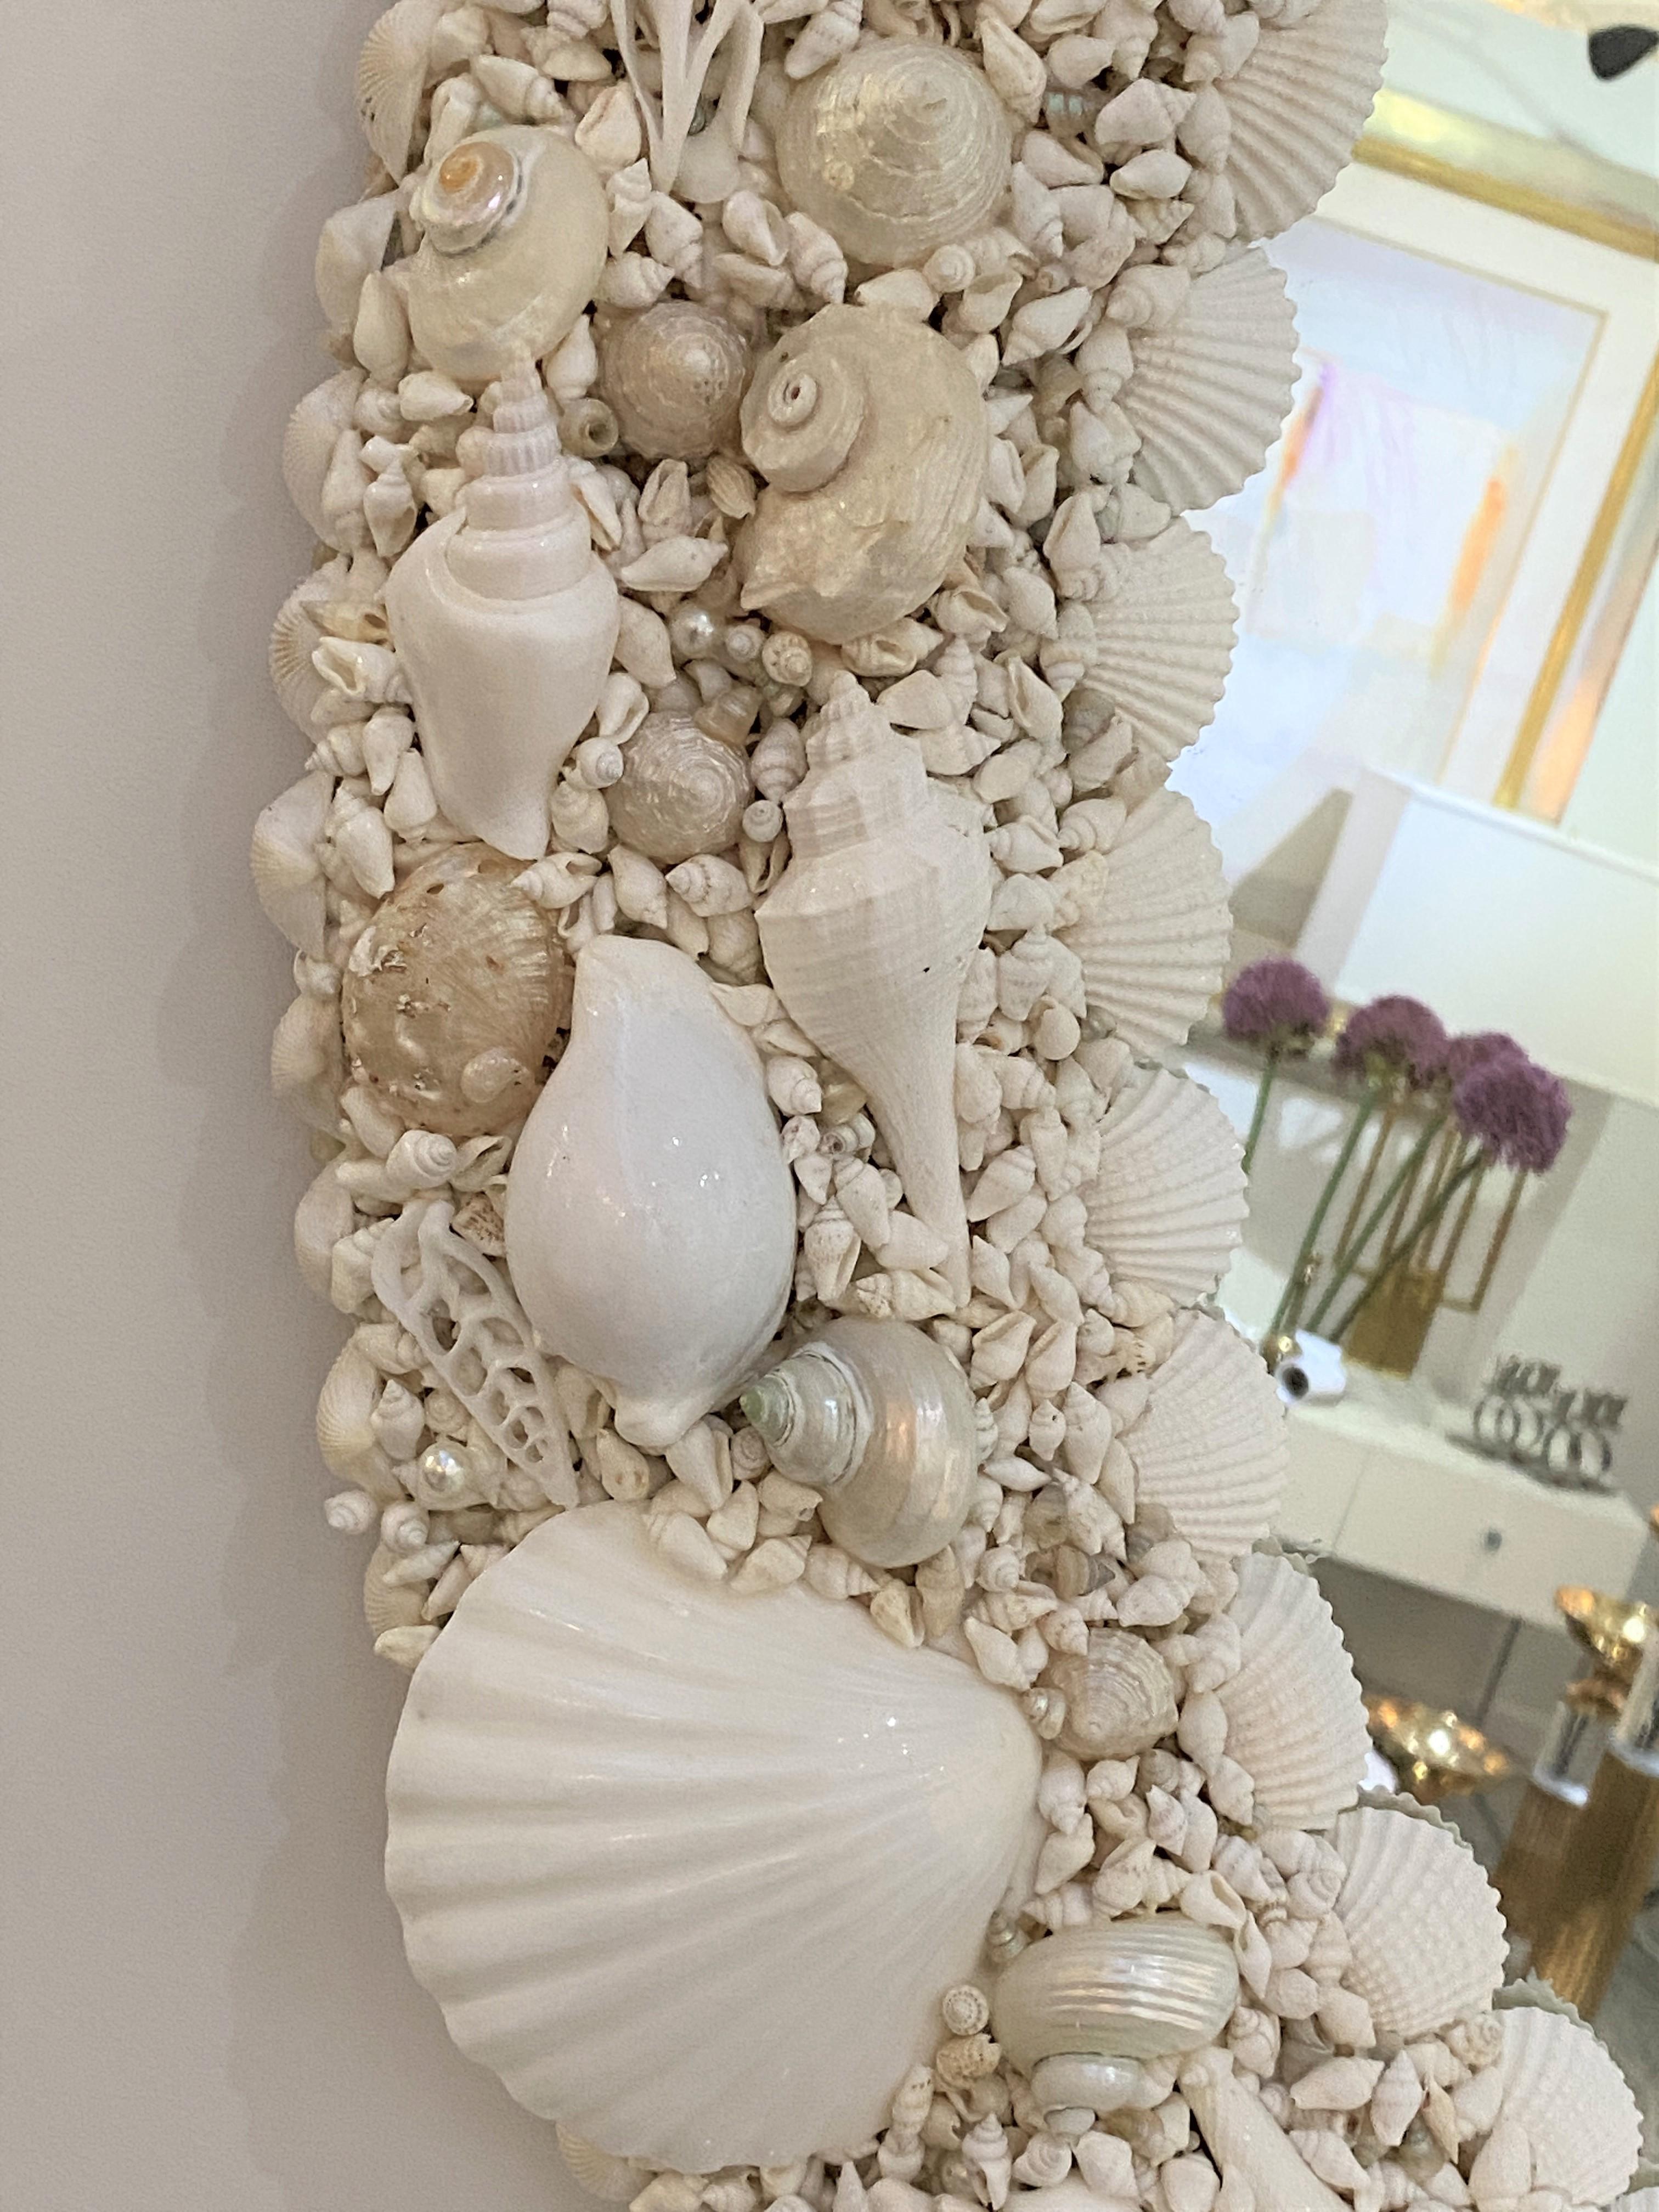 This stylish seashell encrusted mirror was created exclusively for the Iconic Snob Galeries by a local Palm Beach artist, and it will add that bit of Hollywood Regency style to your home and of course a bit of costal living.